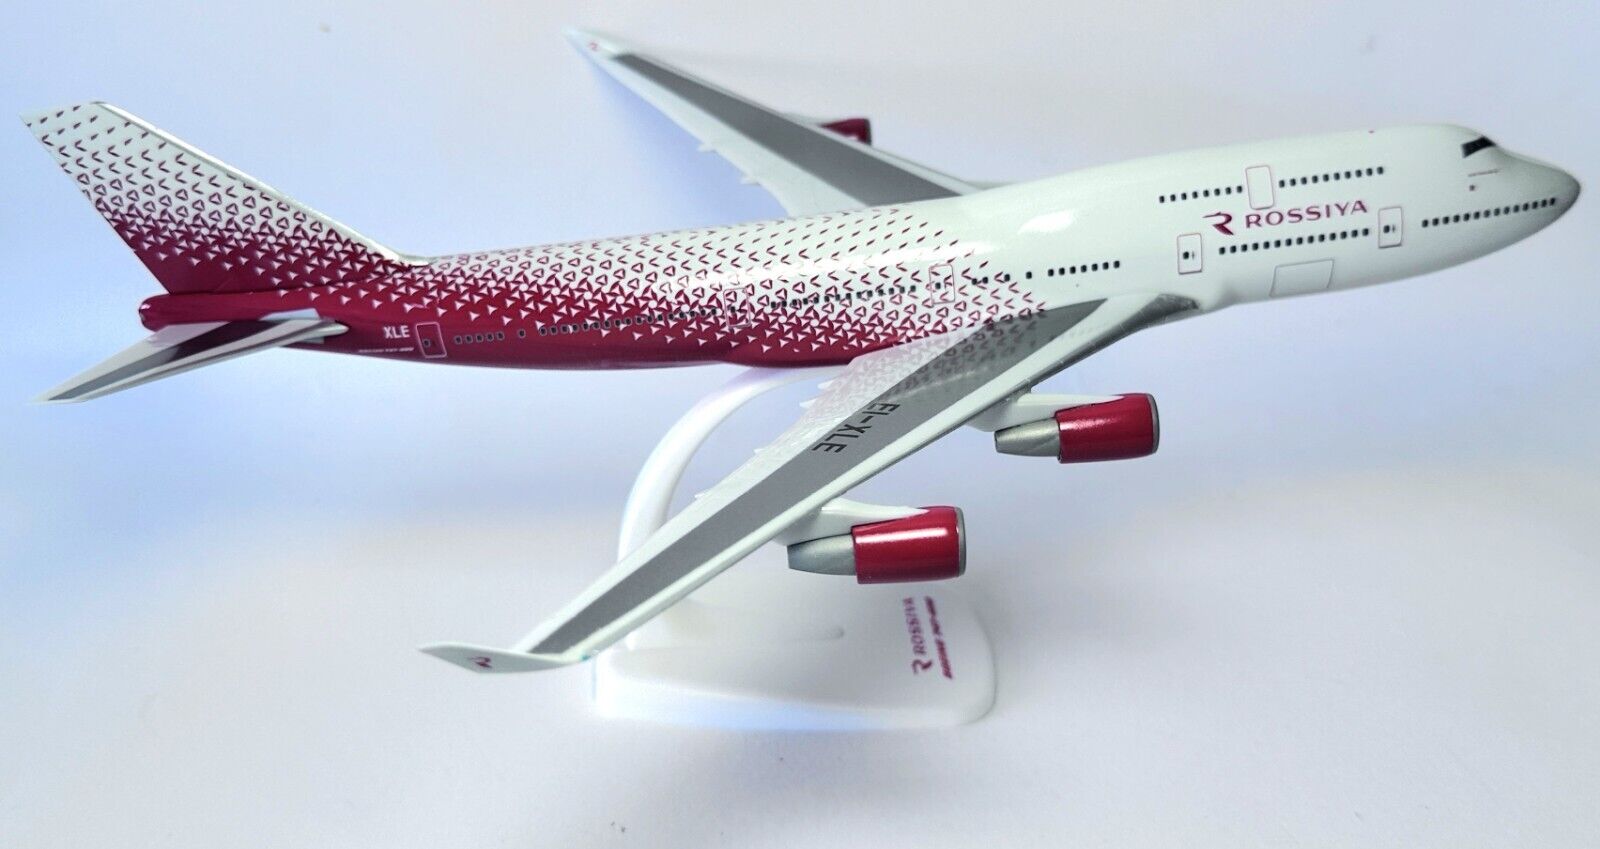 Boeing 747-400 Rossiya Airlines Herpa Snap Fit Collectors Model Scale 1:250